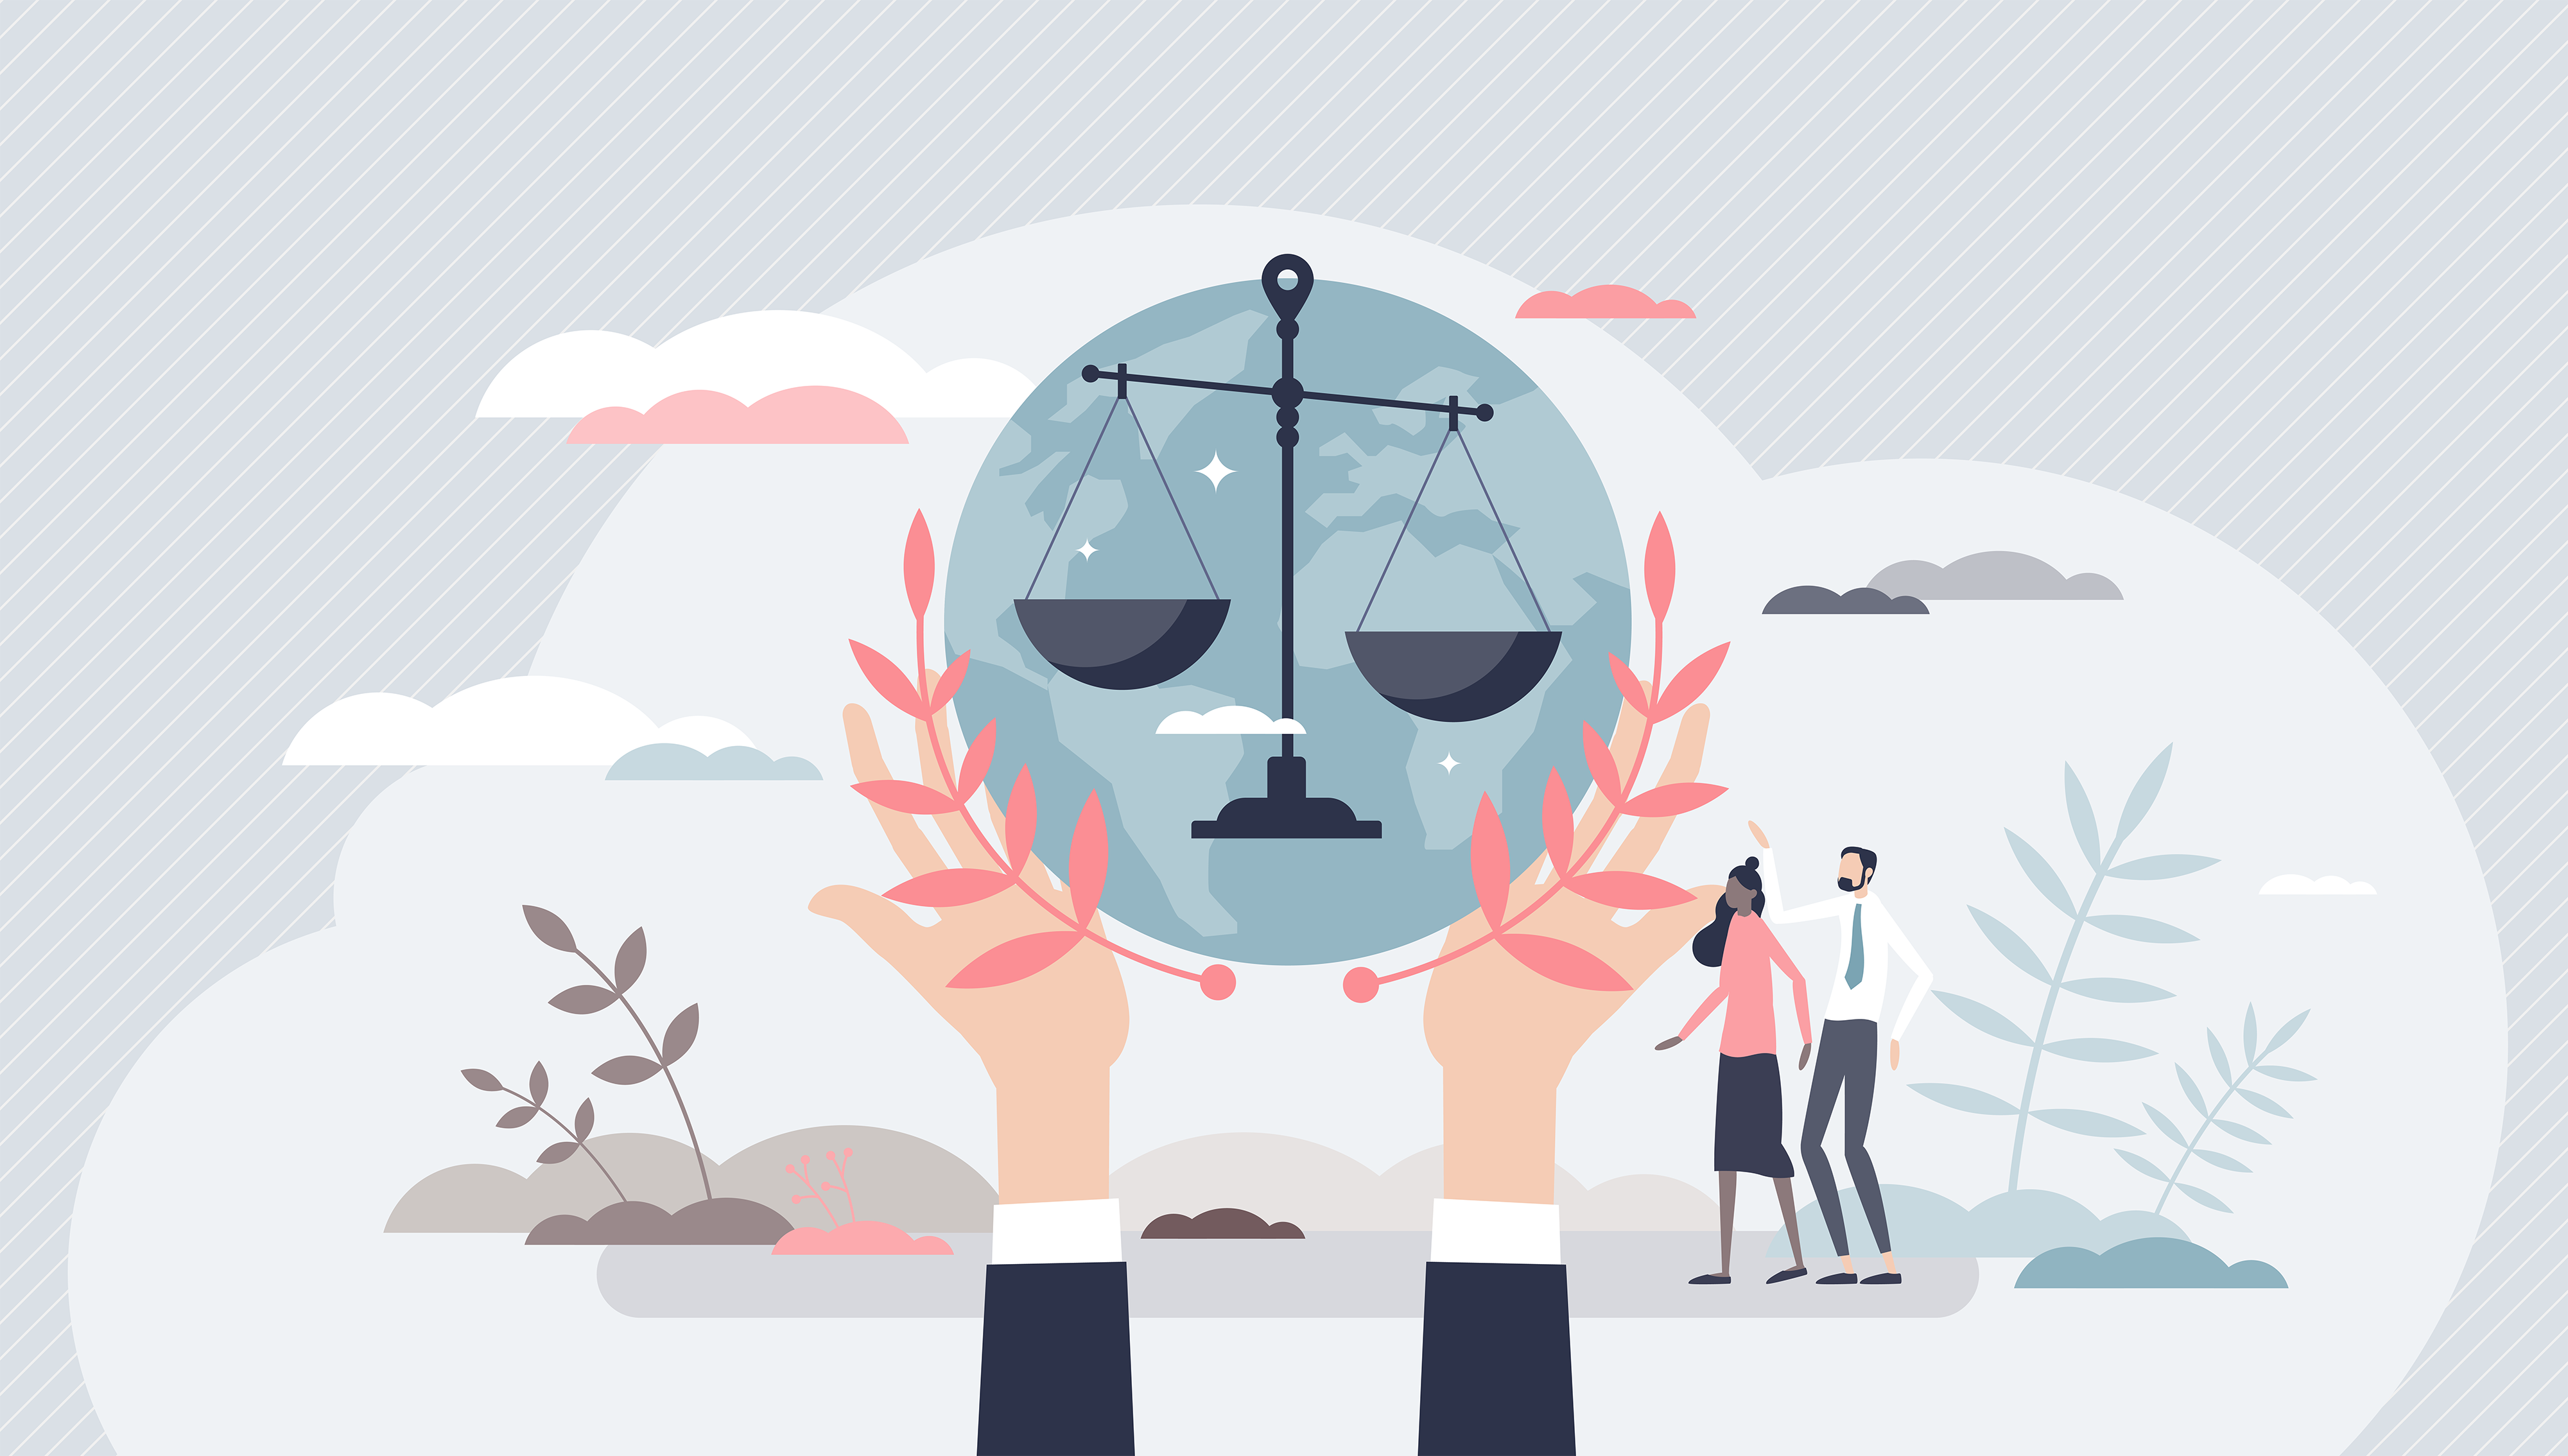 Legislating for Human Rights Due Diligence: How Outcomes for People Connect to the Standard of Conduct